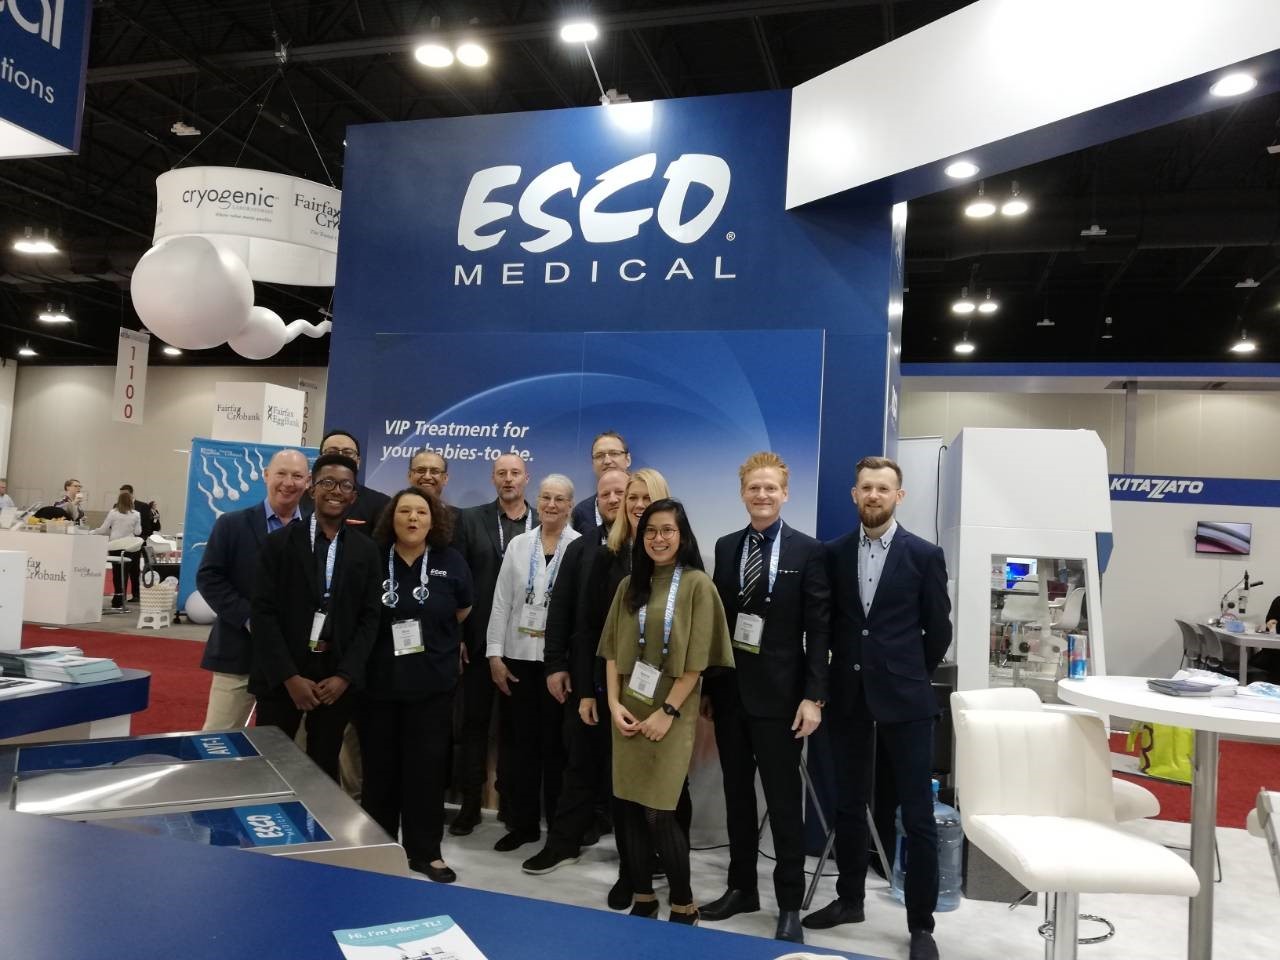 Thank you for visiting US in the U.S. @ ASRM 2018